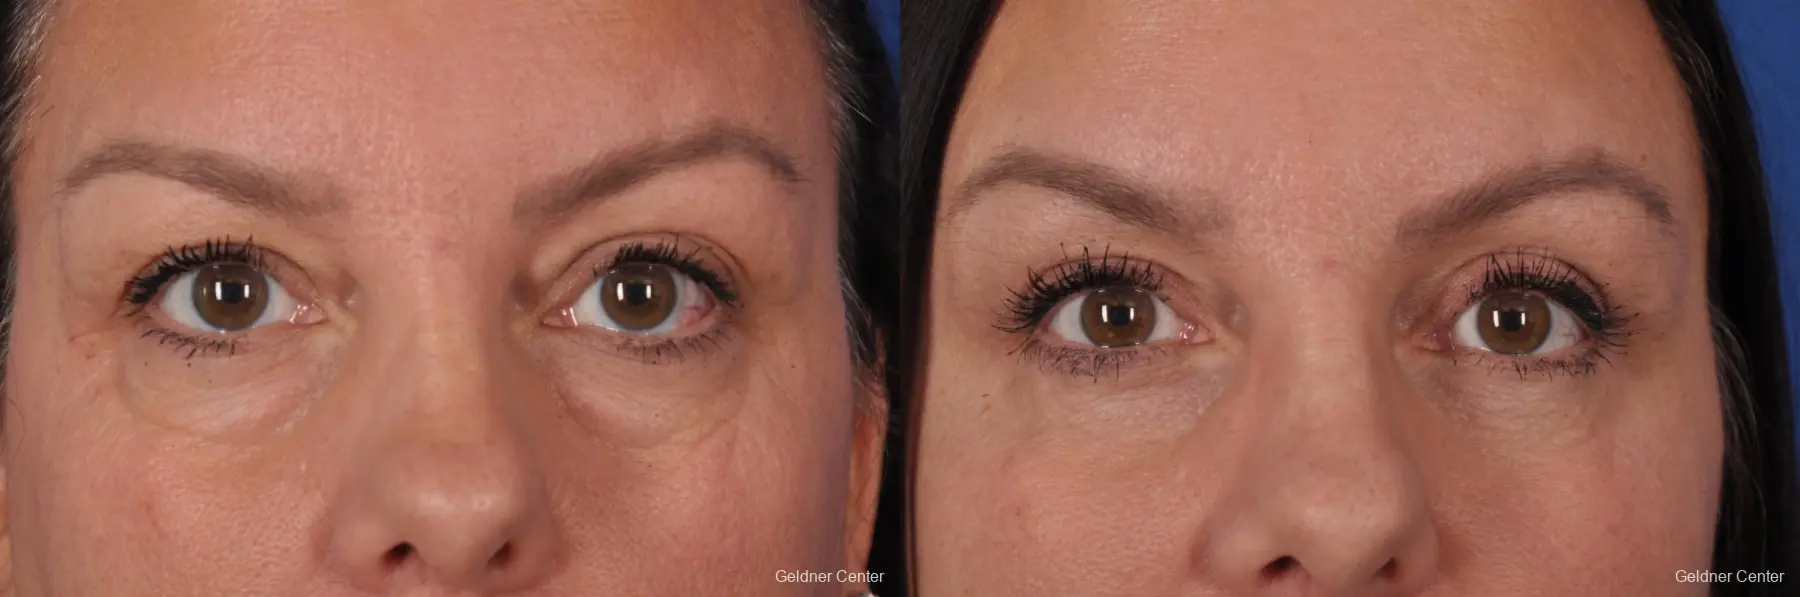 Blepharoplasty: Patient 1 - Before and After 